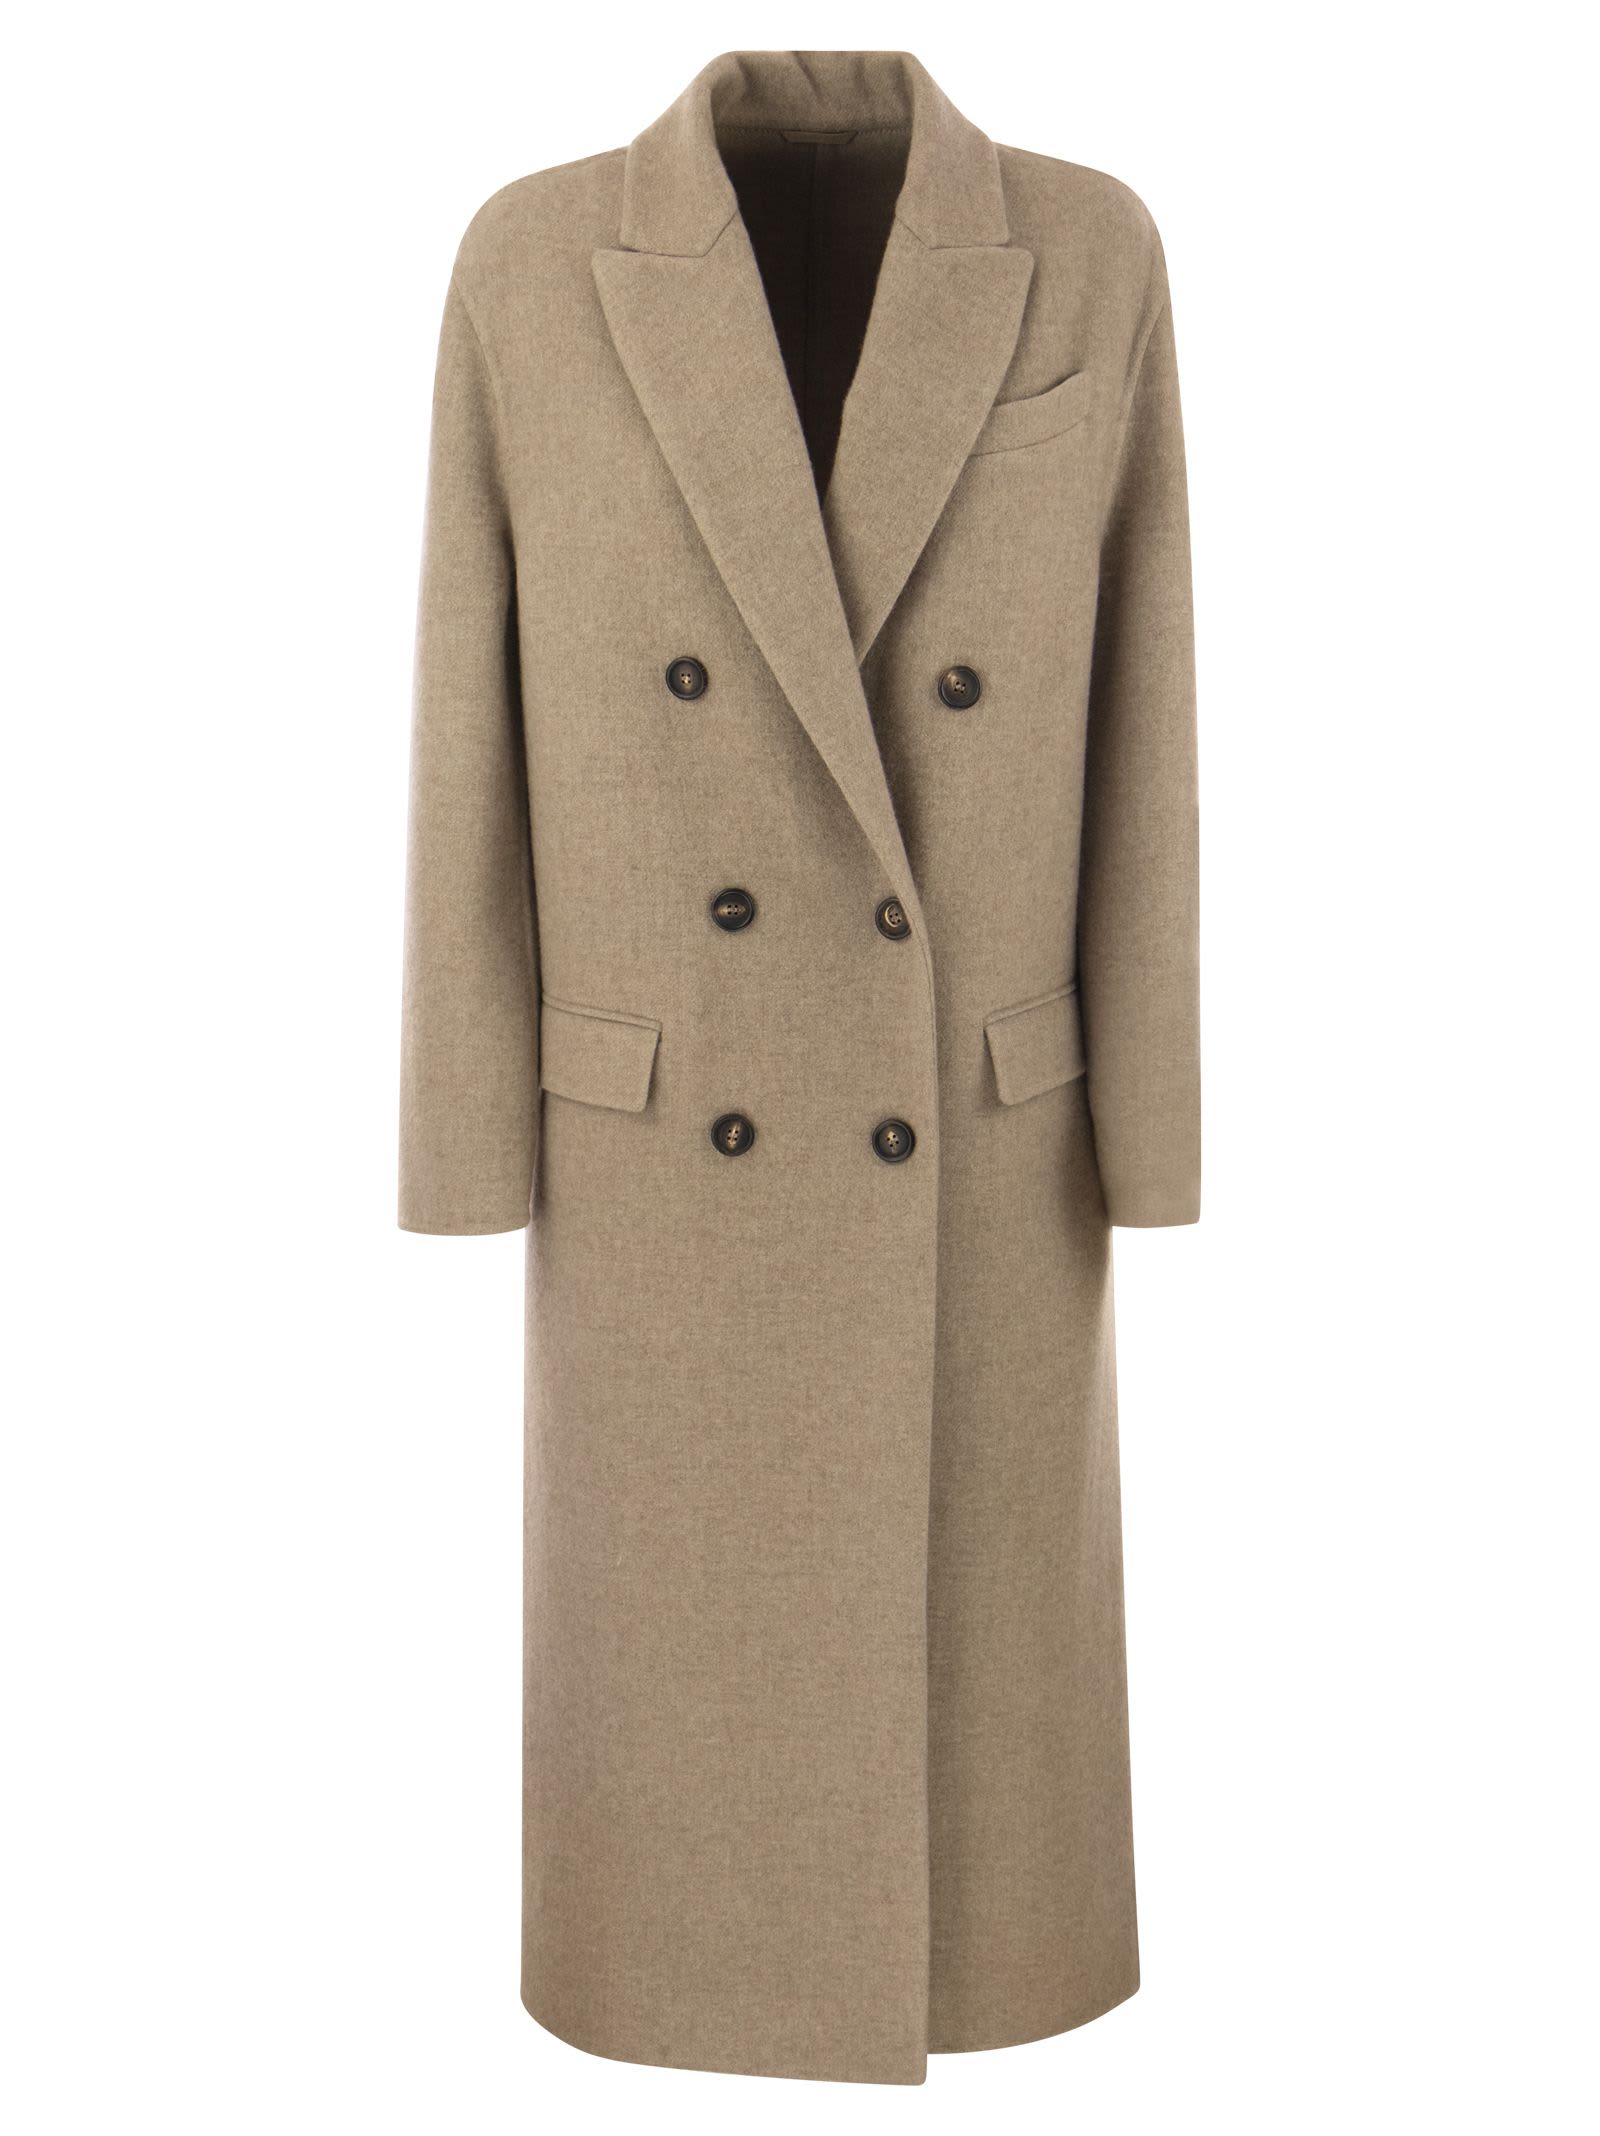 BRUNELLO CUCINELLI LONG-LENGTH DOUBLE-BREASTED COAT